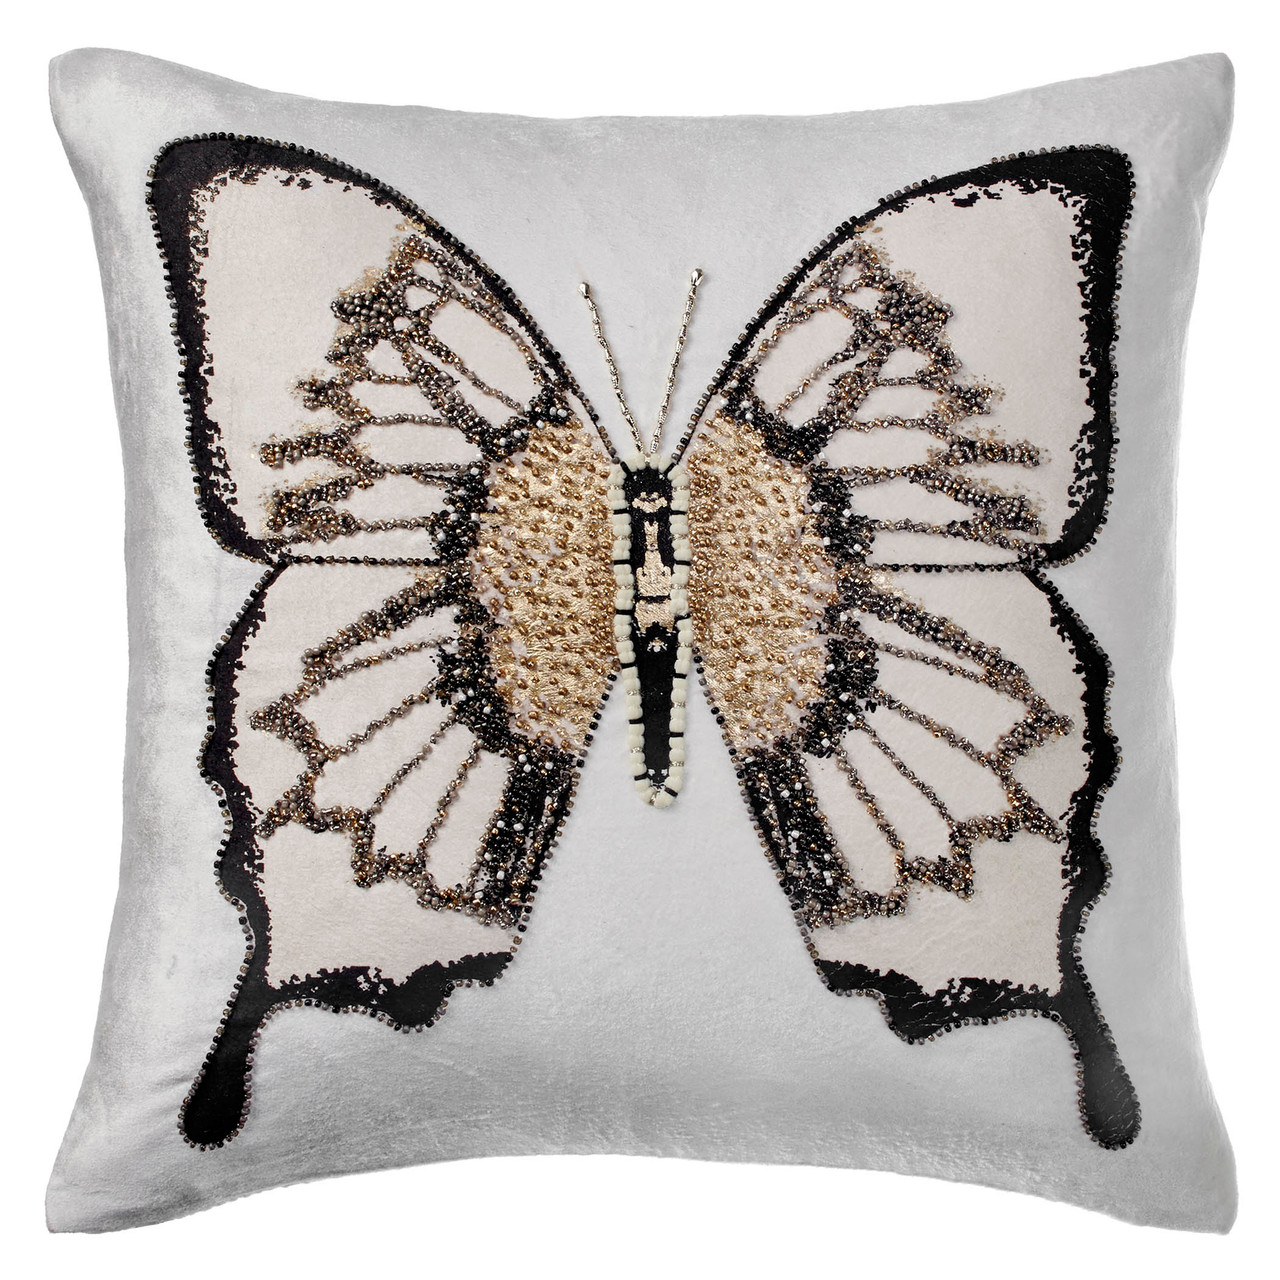 Monarch Specialties I 9235 Gold & Grey Abstract Dot 18x18 Pillow - Set of 2